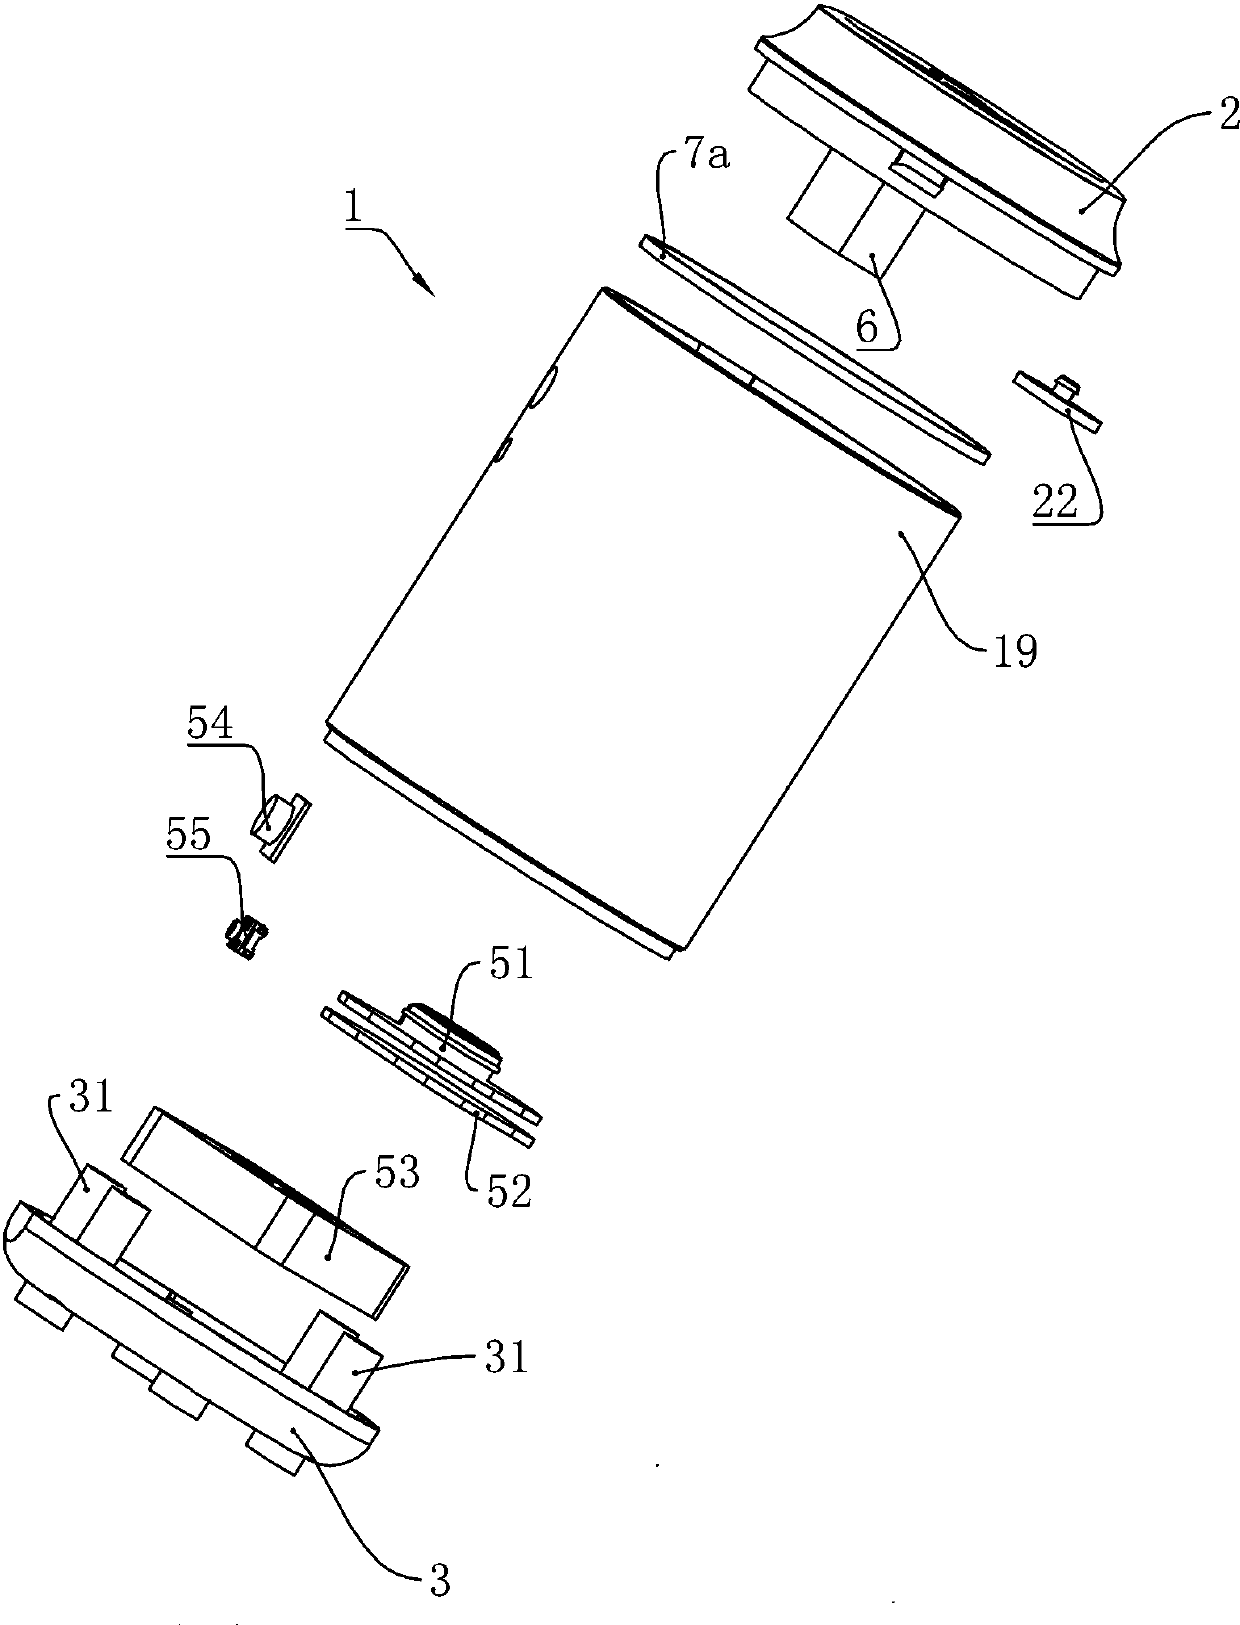 Atomizer capable of being applied to mobile platform